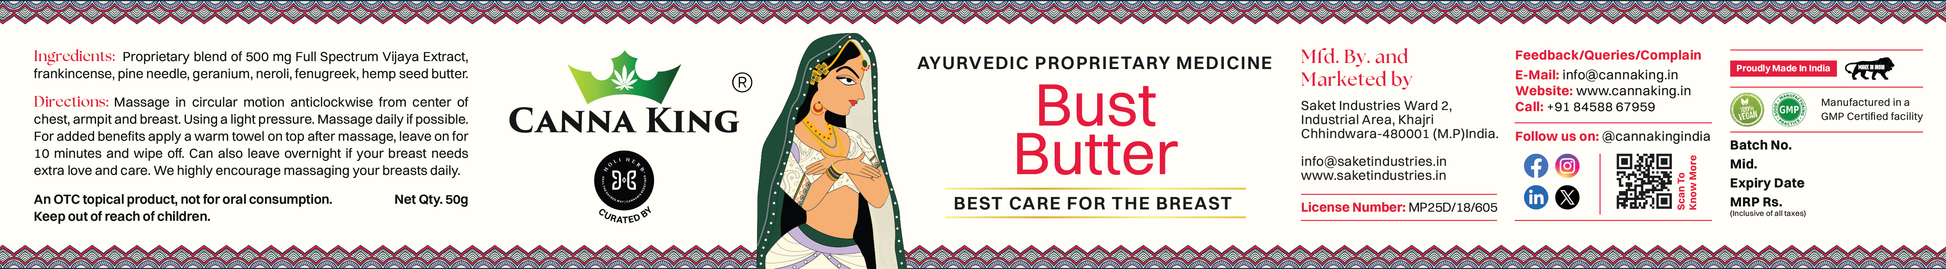 Bust Butter: Best Care for the Breast